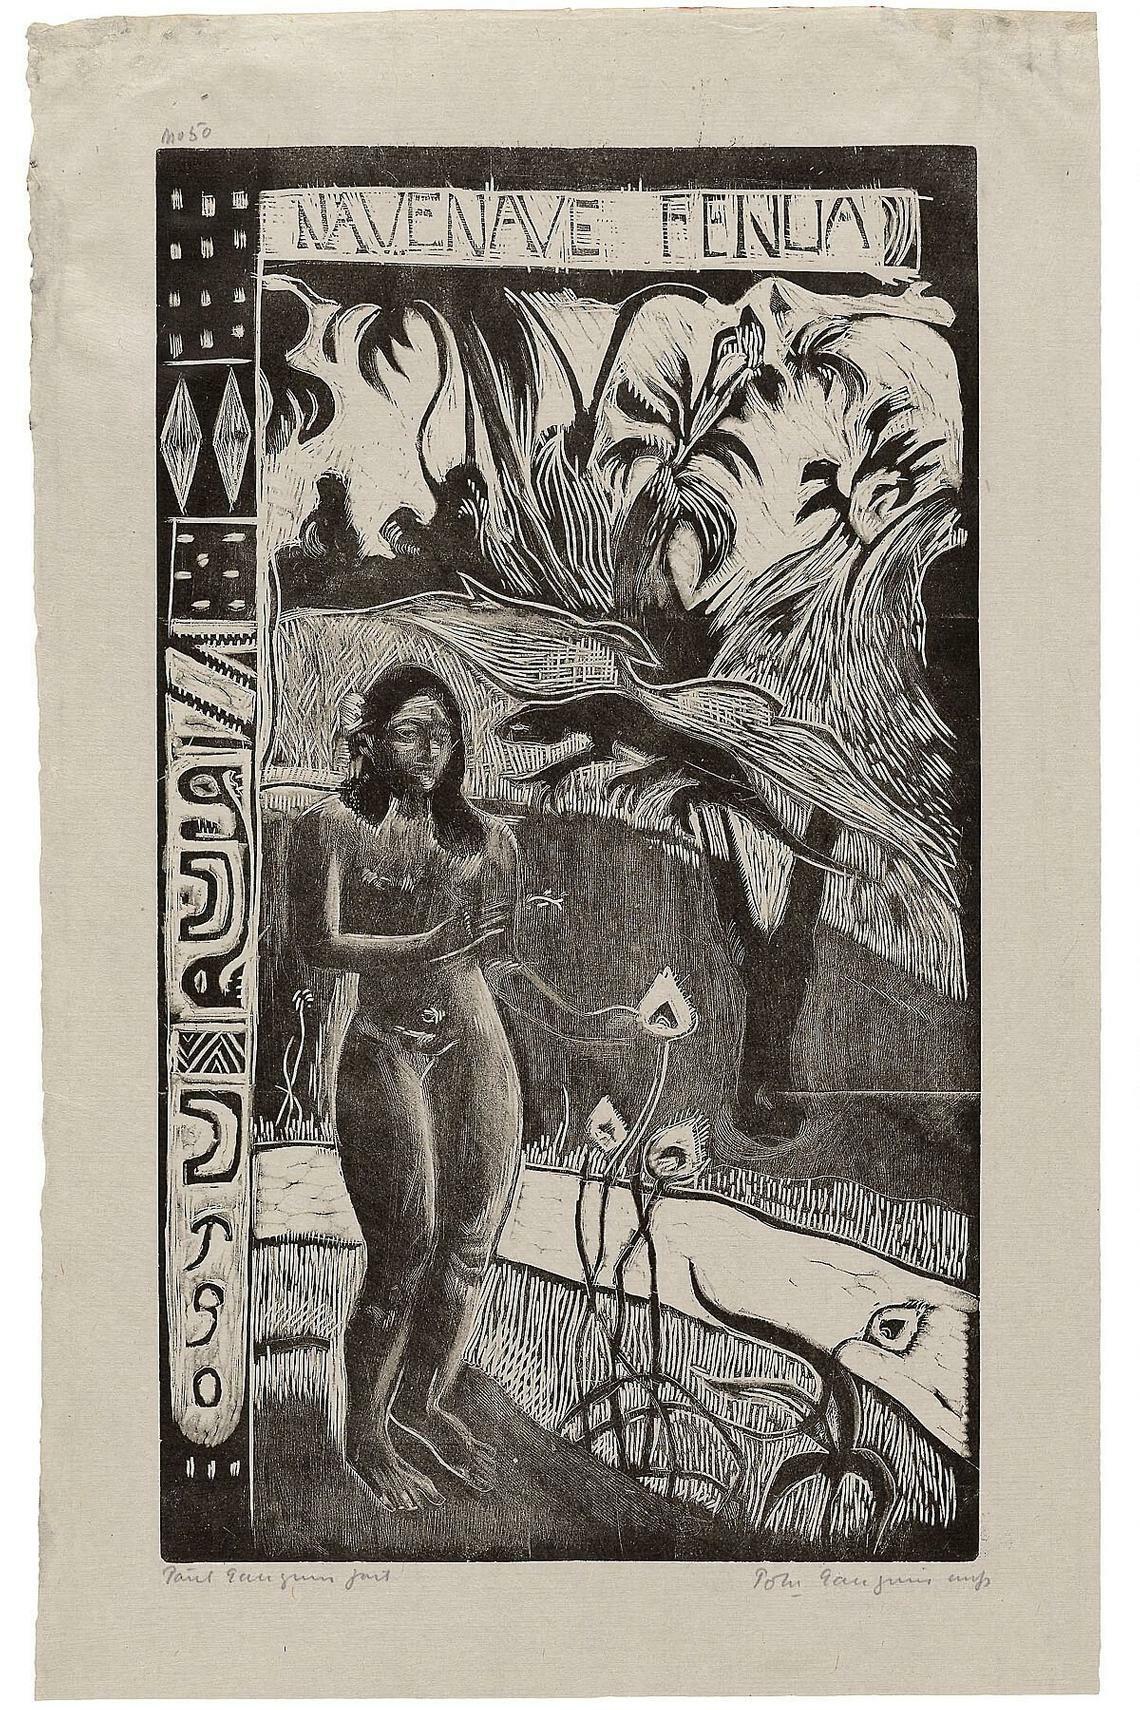 print of native female from Marquesas Islands